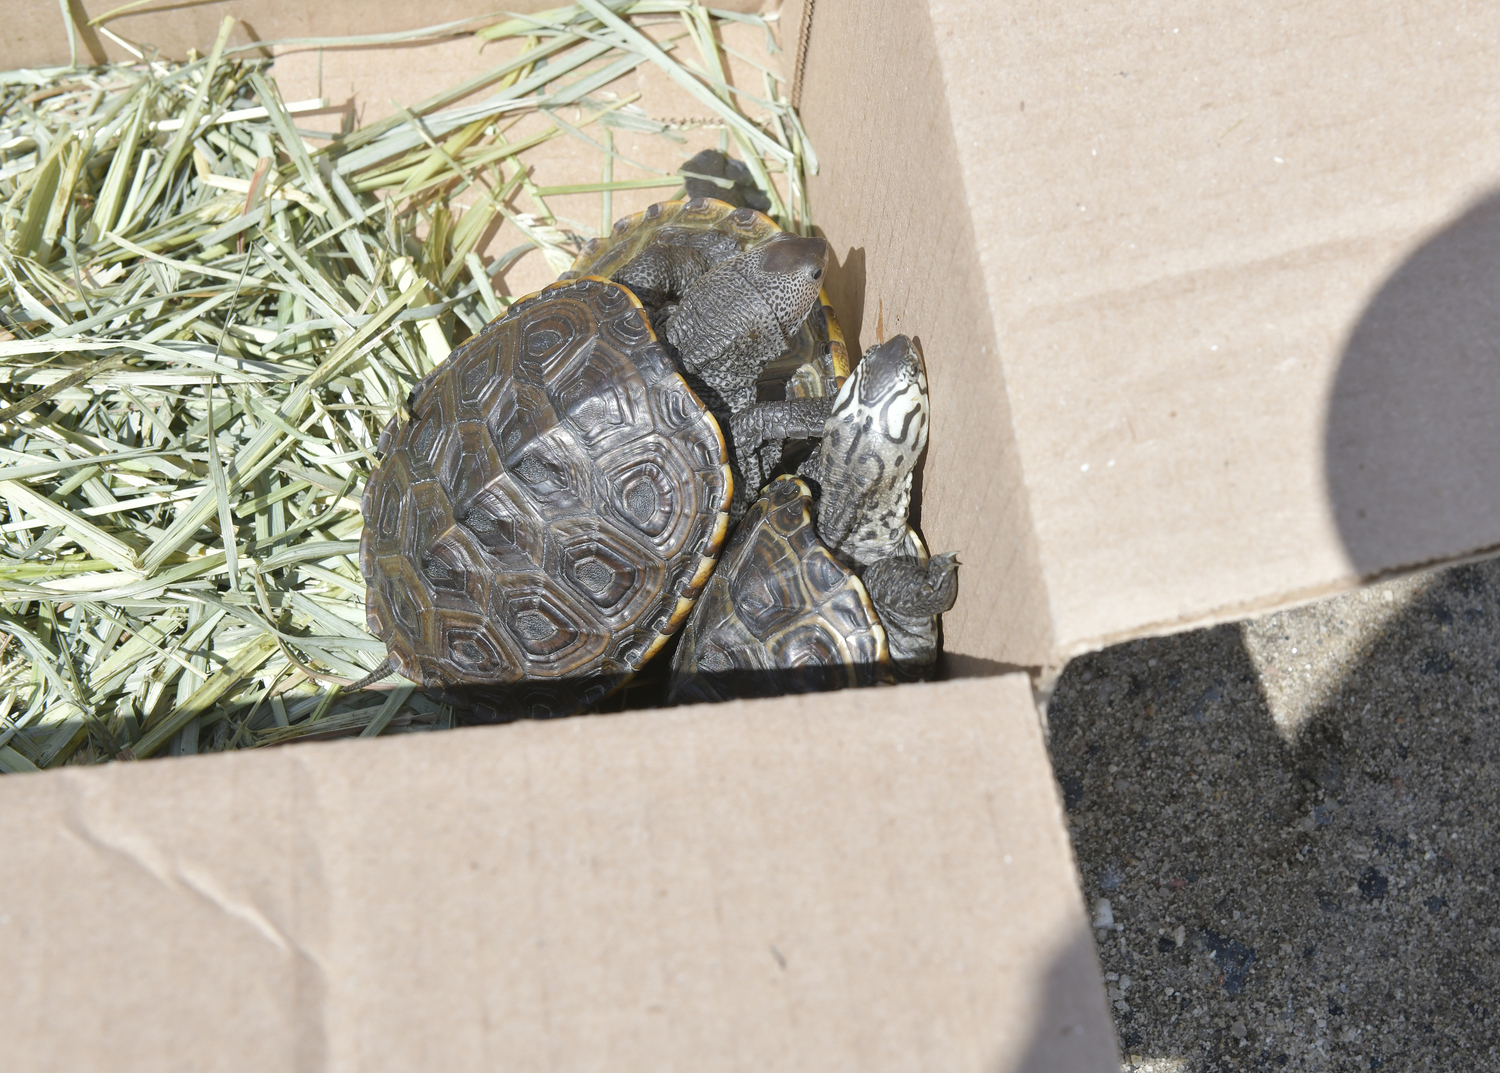 Baby Turtles Are on the Move in Arlington